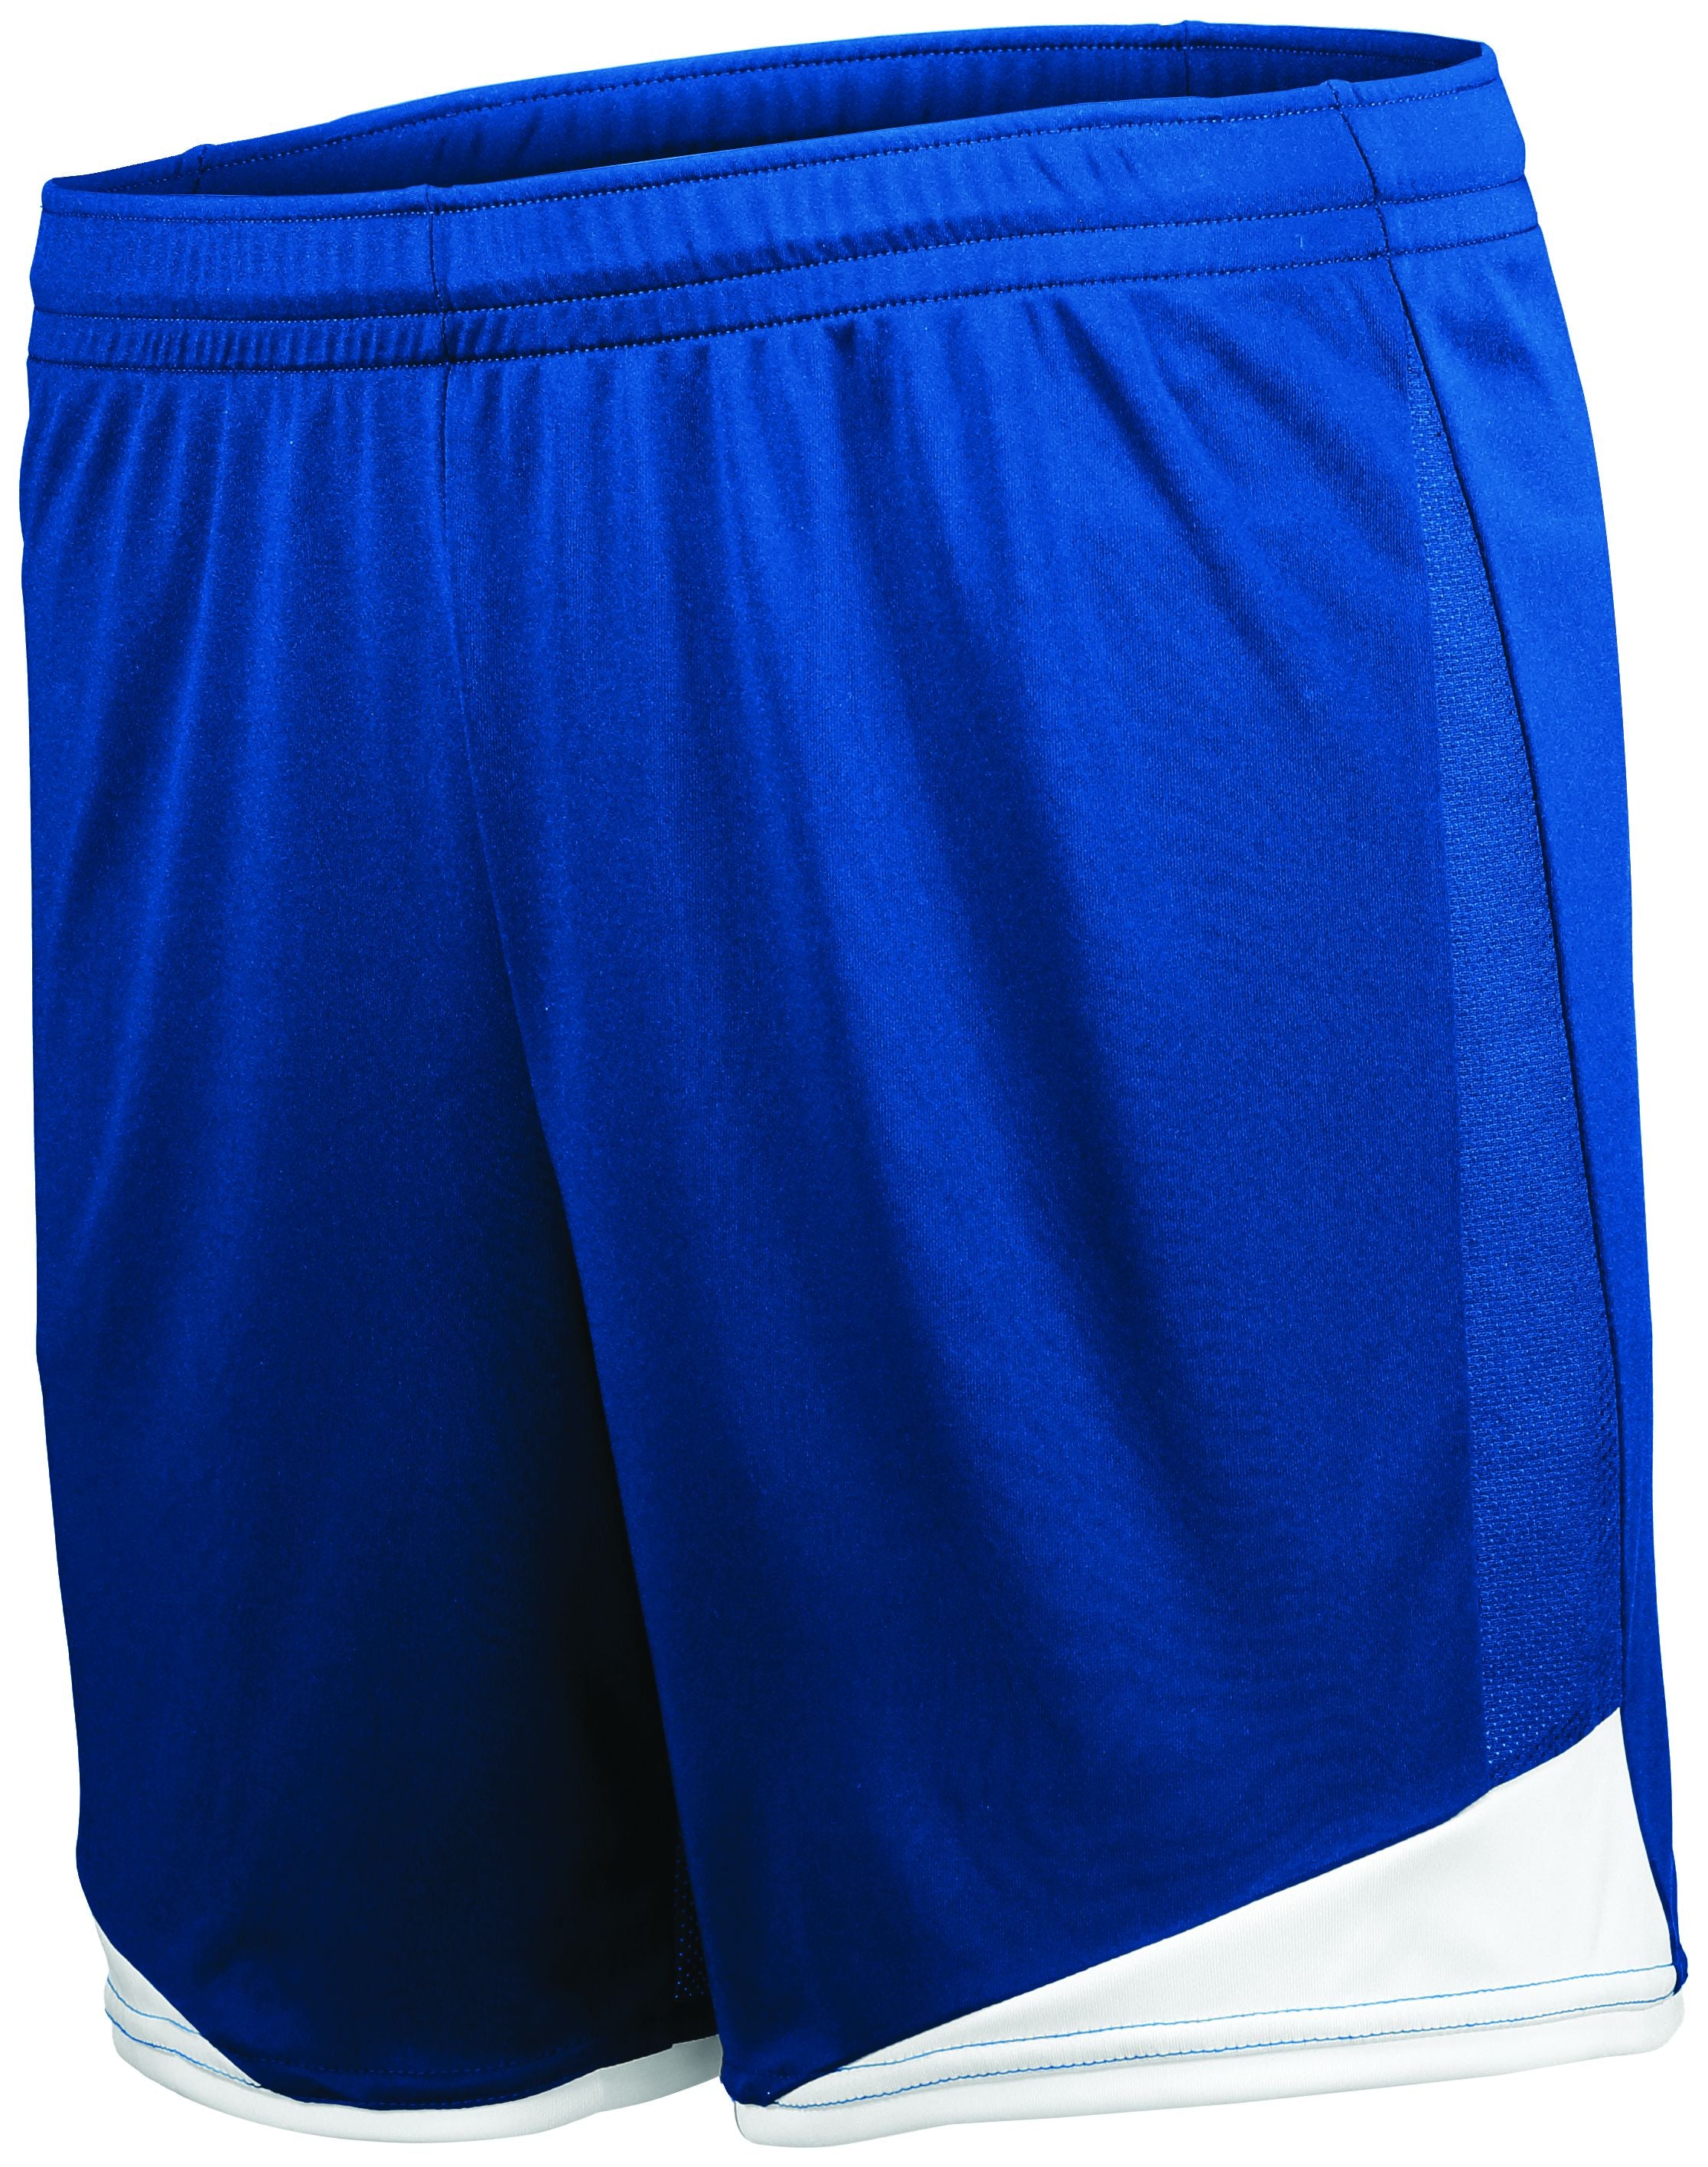 High 5 Ladies Stamford Soccer Shorts in Royal/White  -Part of the Ladies, Ladies-Shorts, High5-Products, Soccer, All-Sports-1 product lines at KanaleyCreations.com